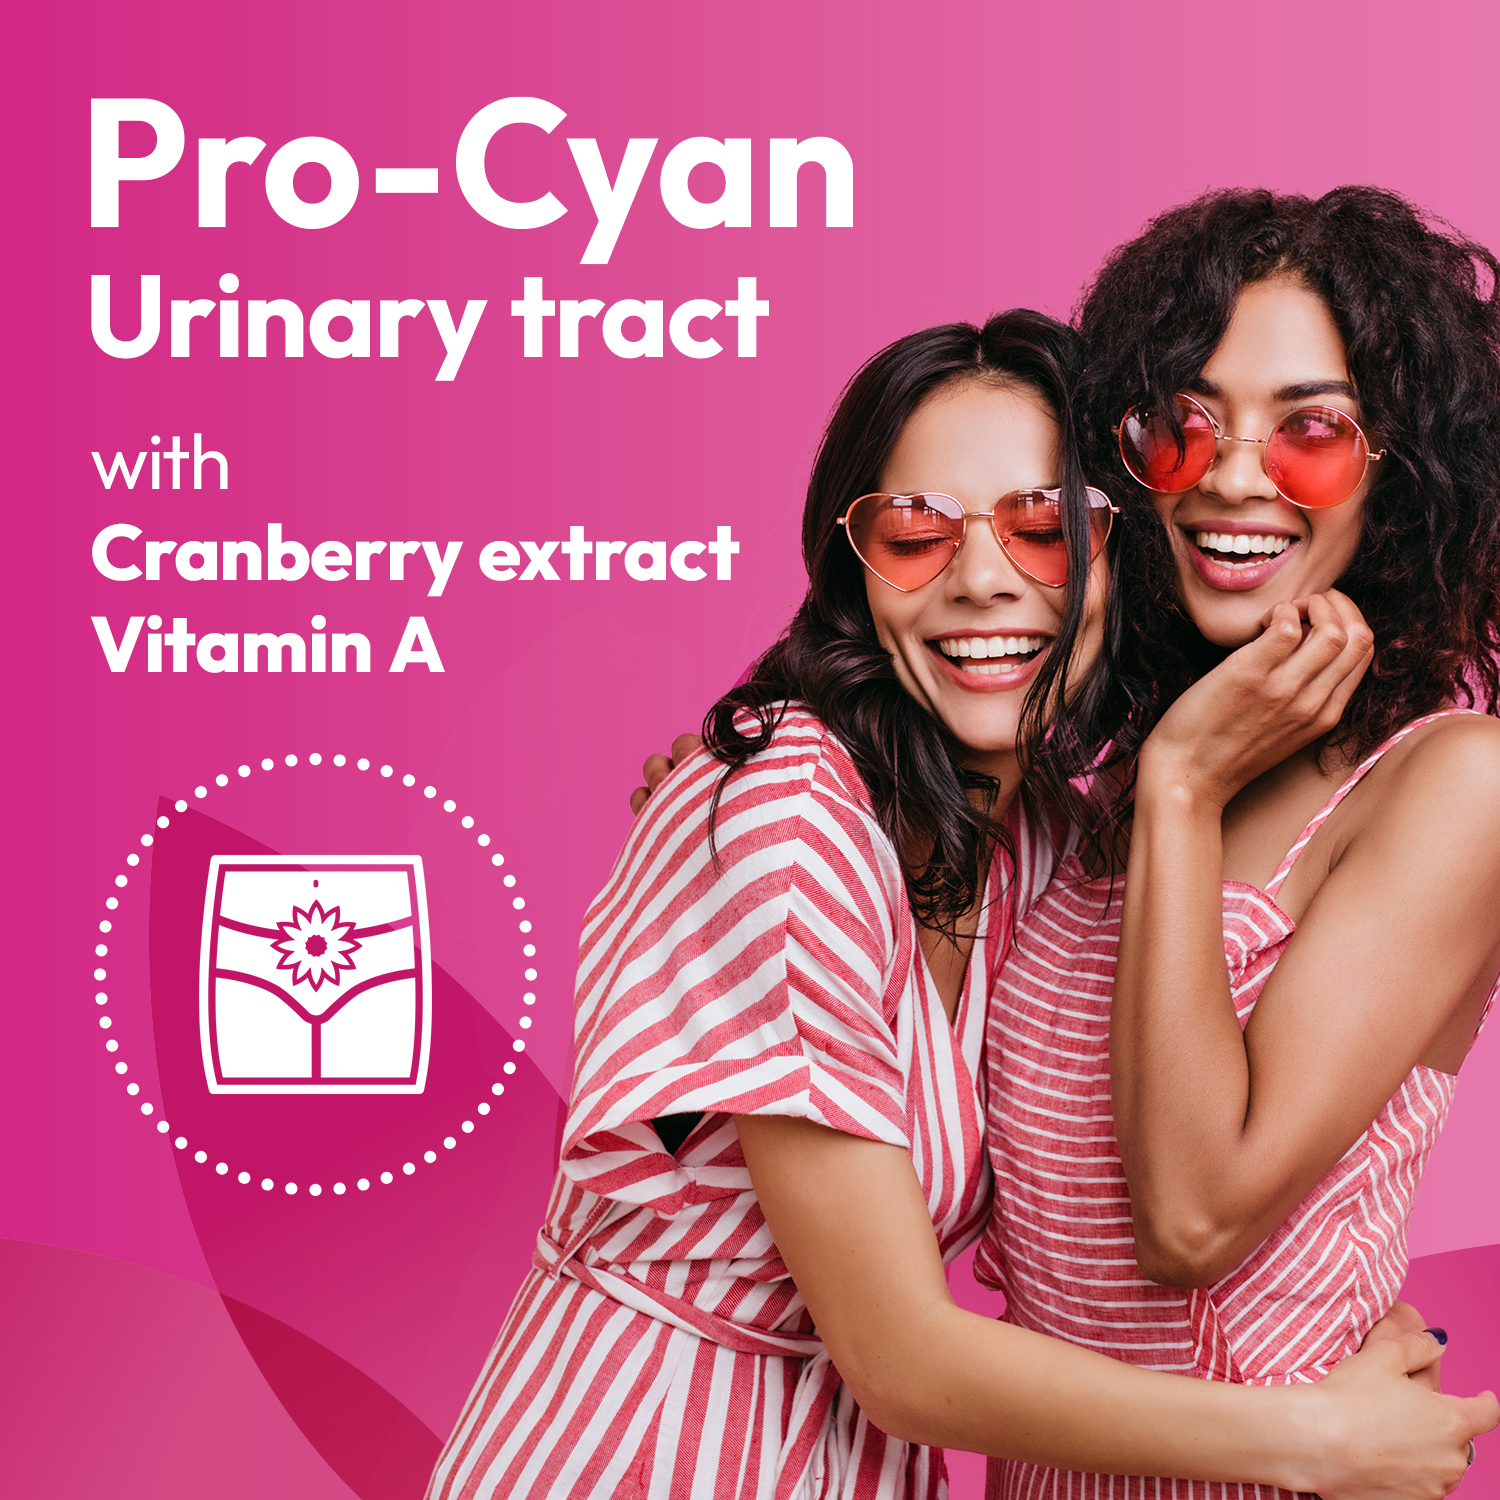 pRO-CYAN URINARY TRACT WIOTH CRANBERRY EXTRACT vitamin A.